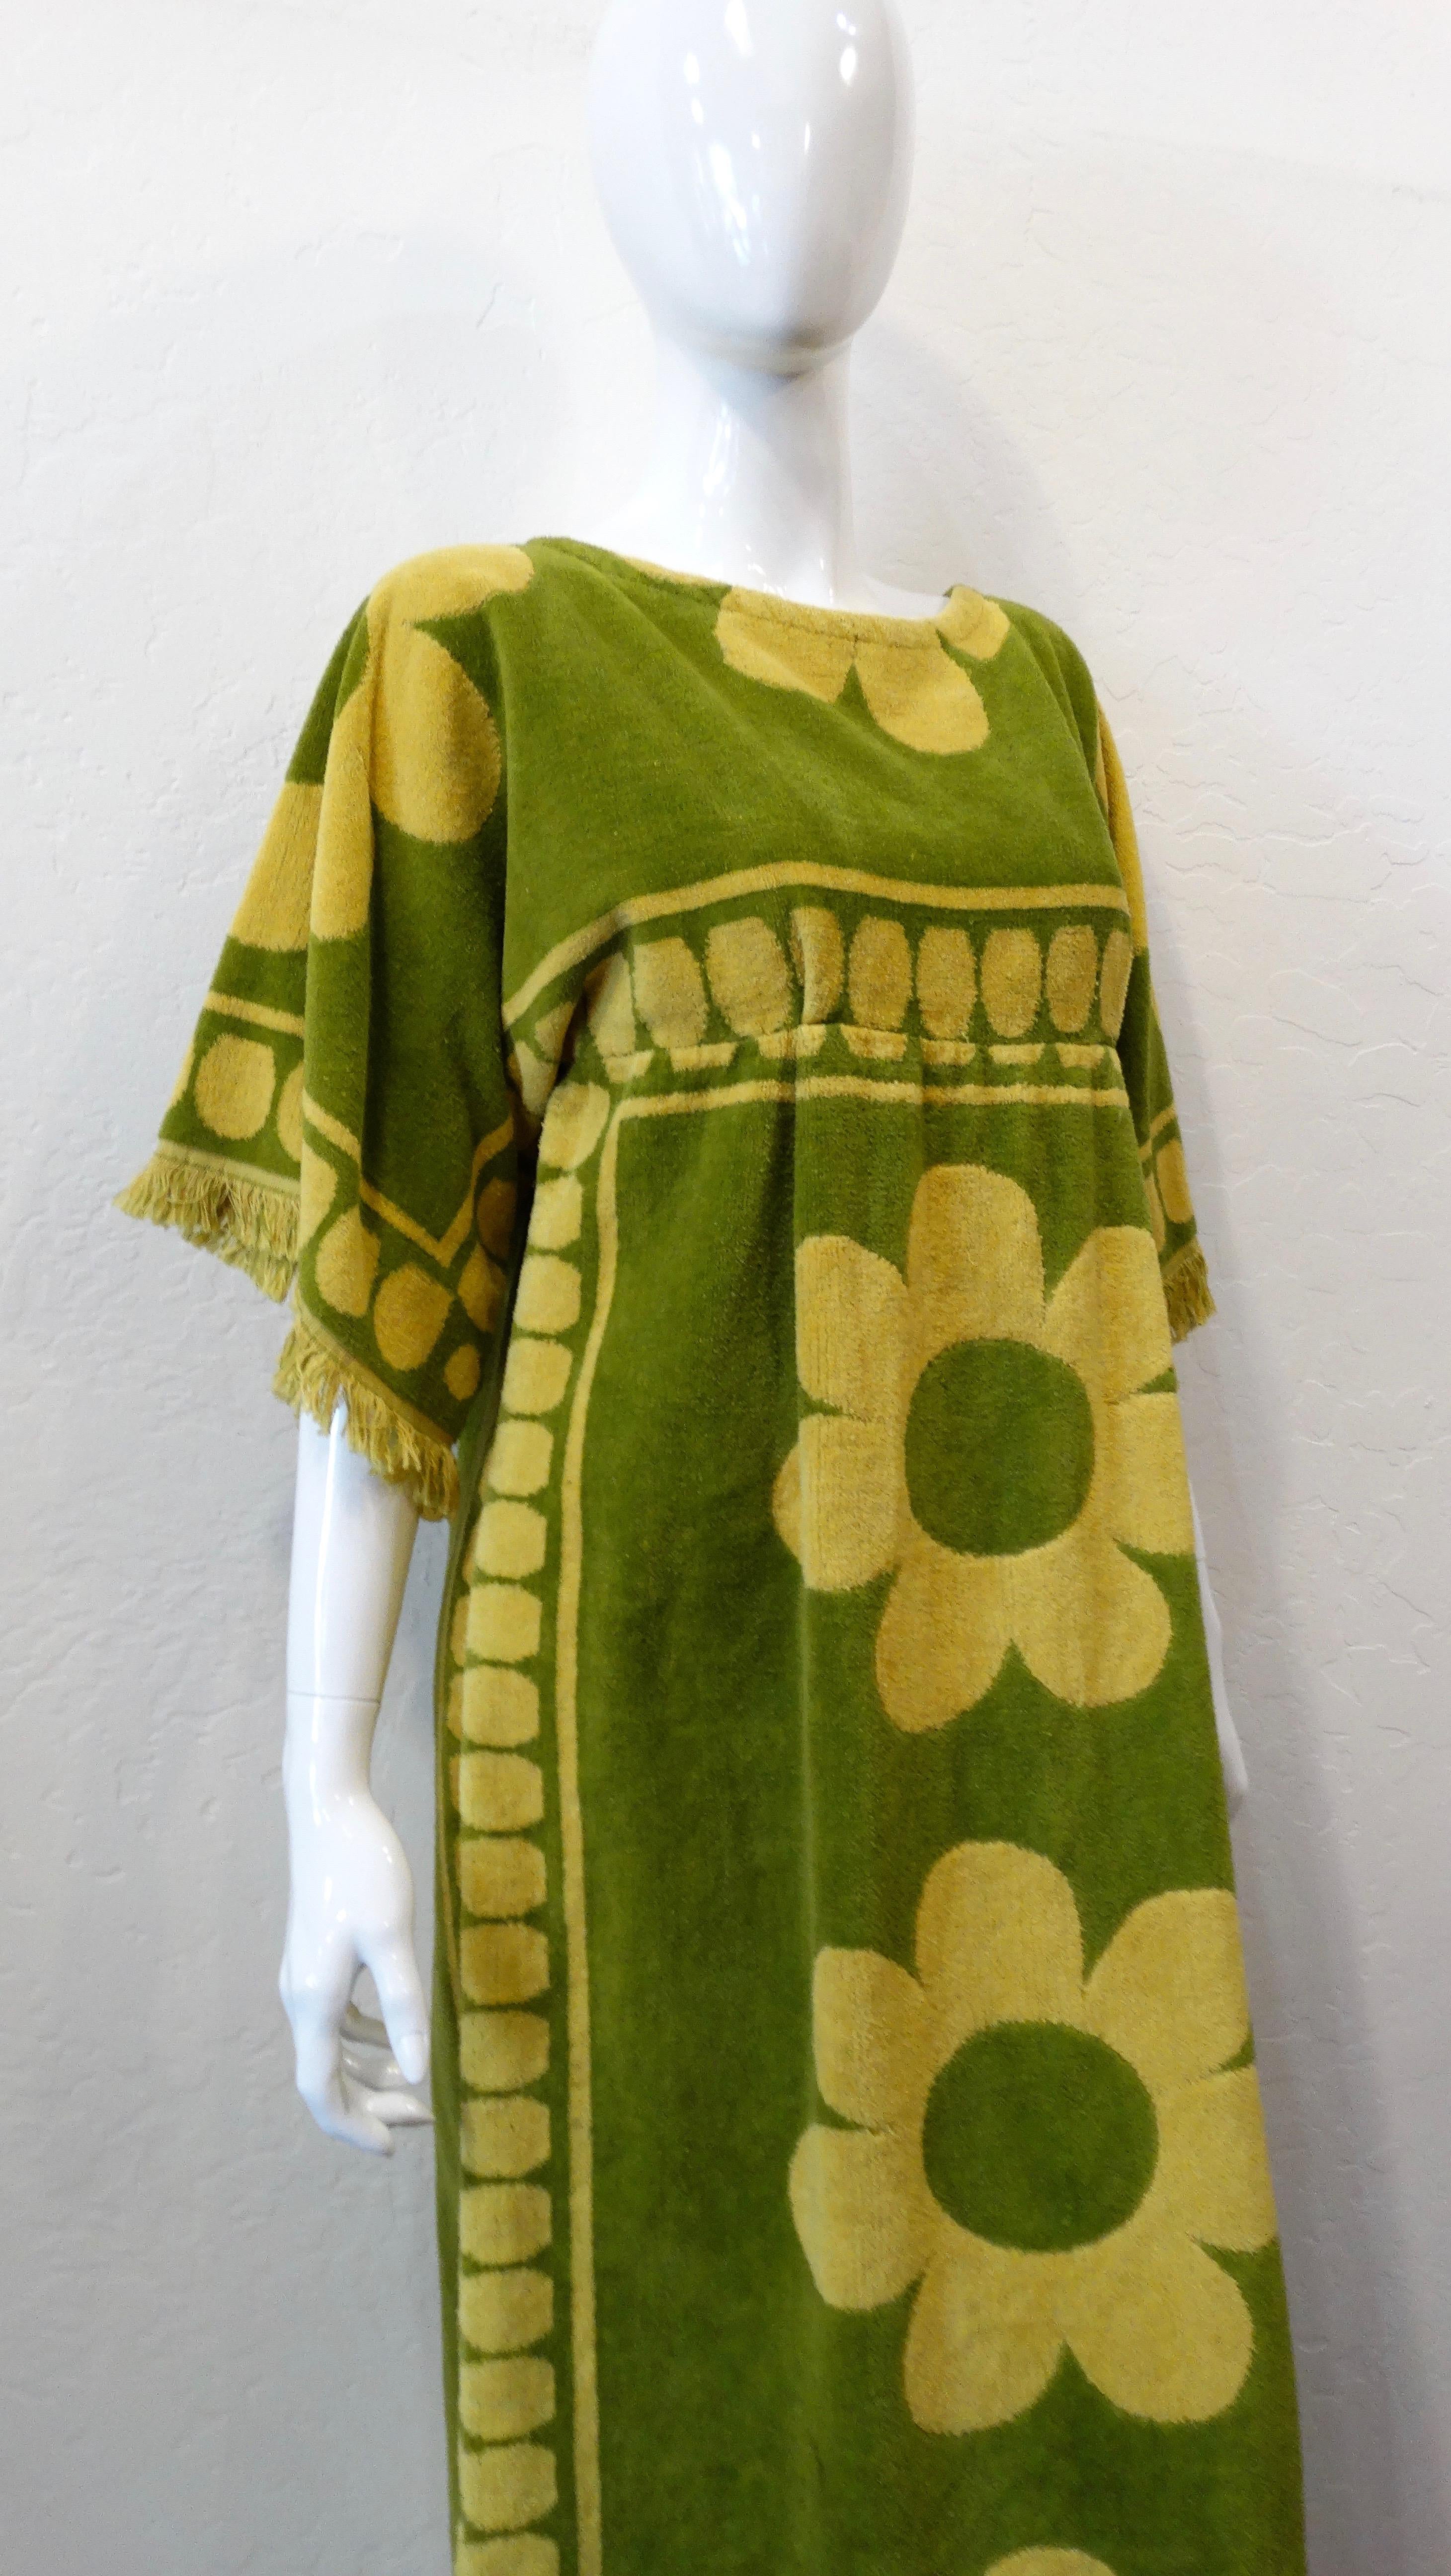 Feel all the flower power with this adorable towel dress! Circa 1960s, this maxi length towel dress is made of light olive green terry cloth and features a contrasting chartreuse polka dot and large daisy pattern. Includes a frayed trim, an empire